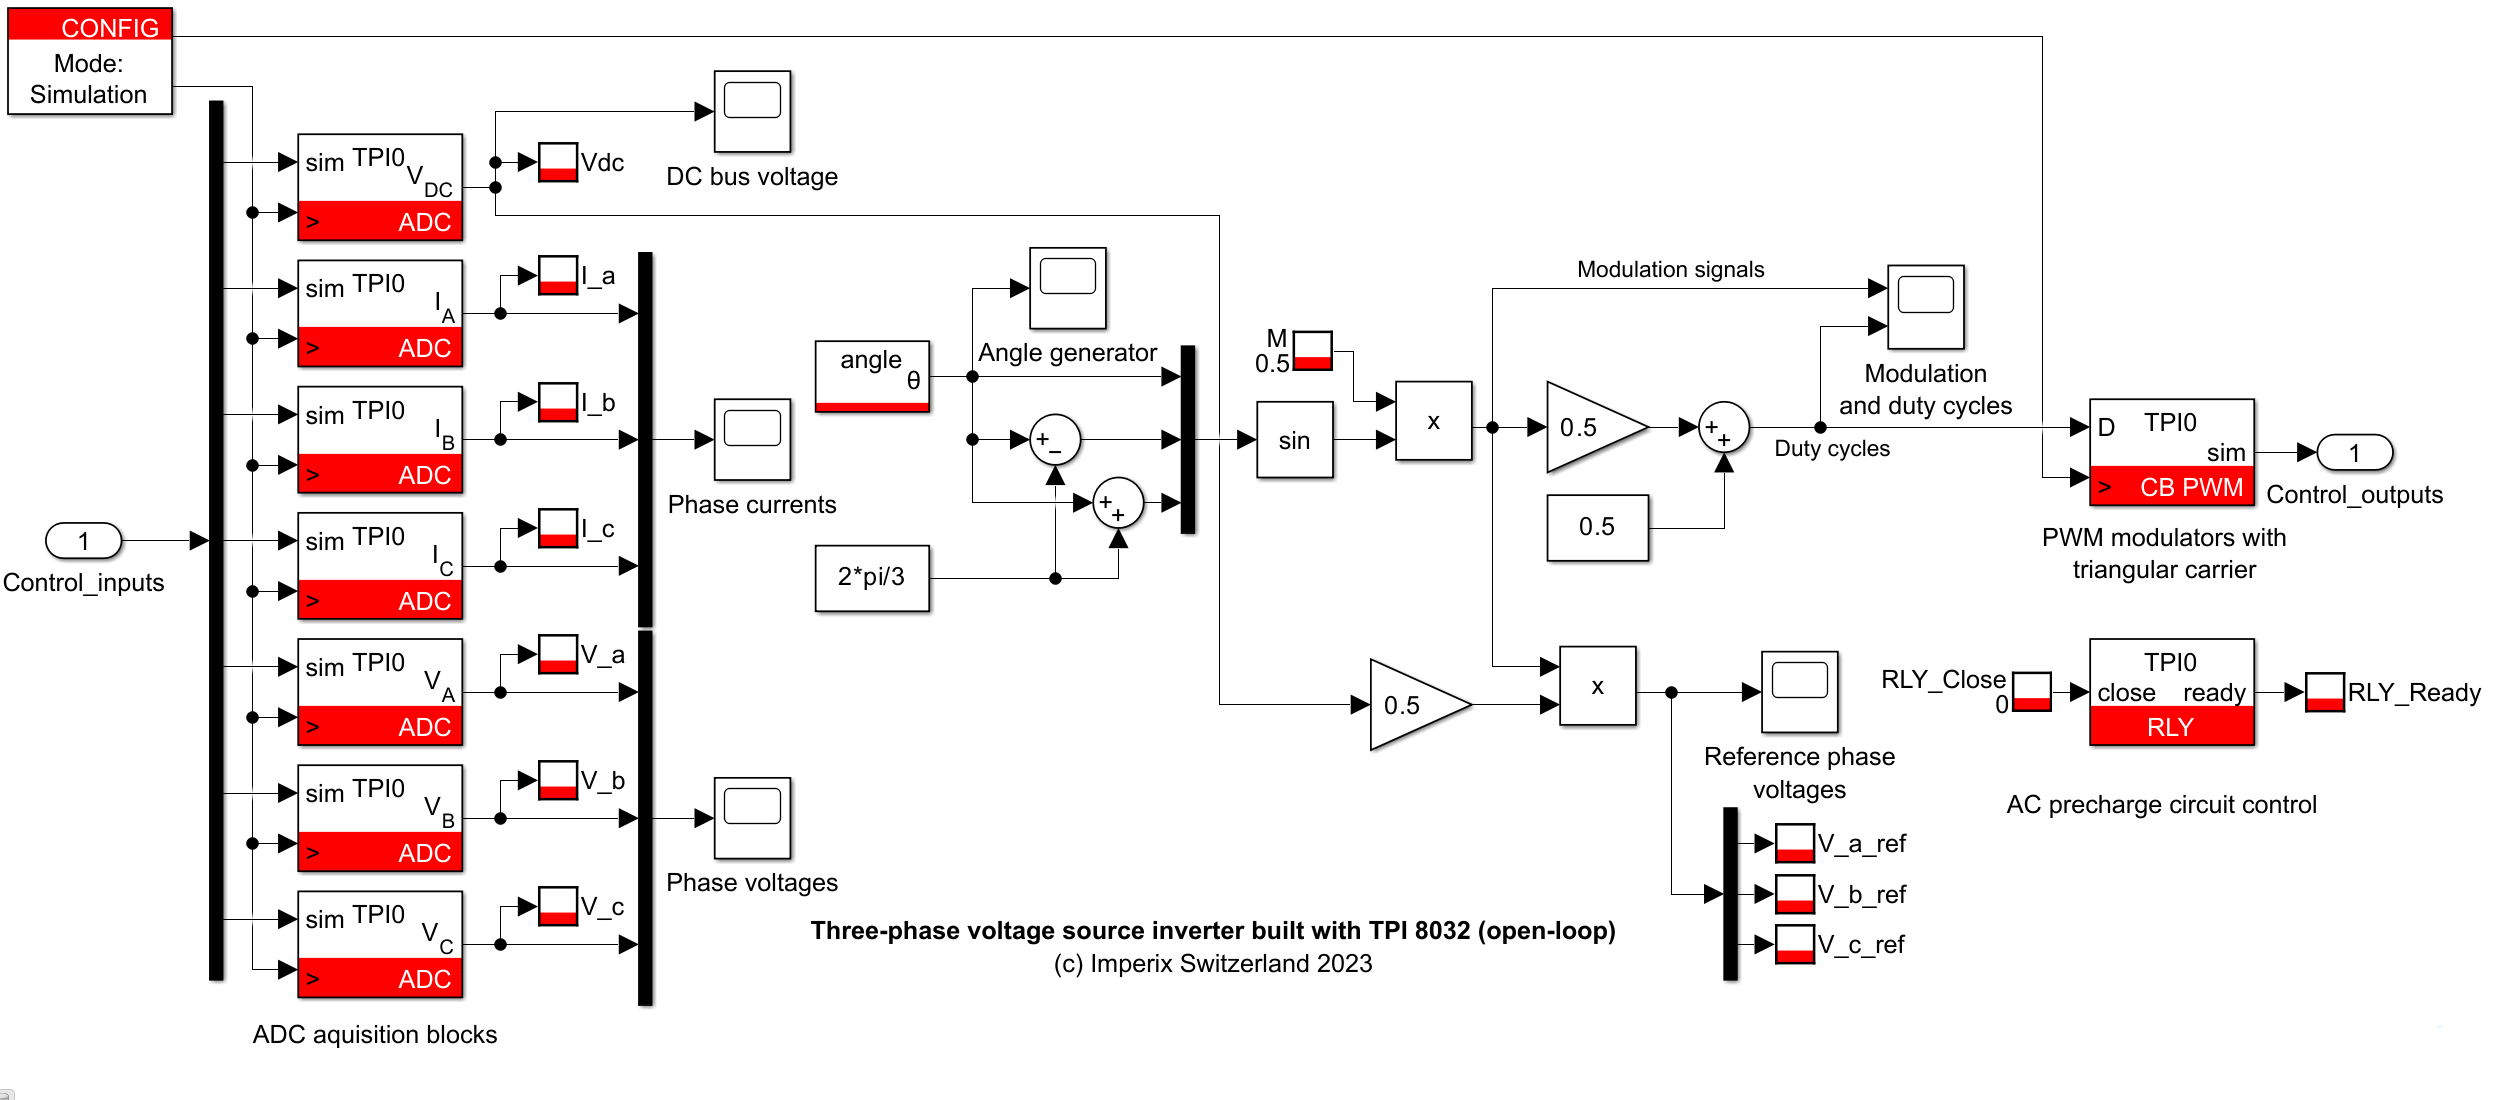 Overview of the Simulink demo model for the TPI